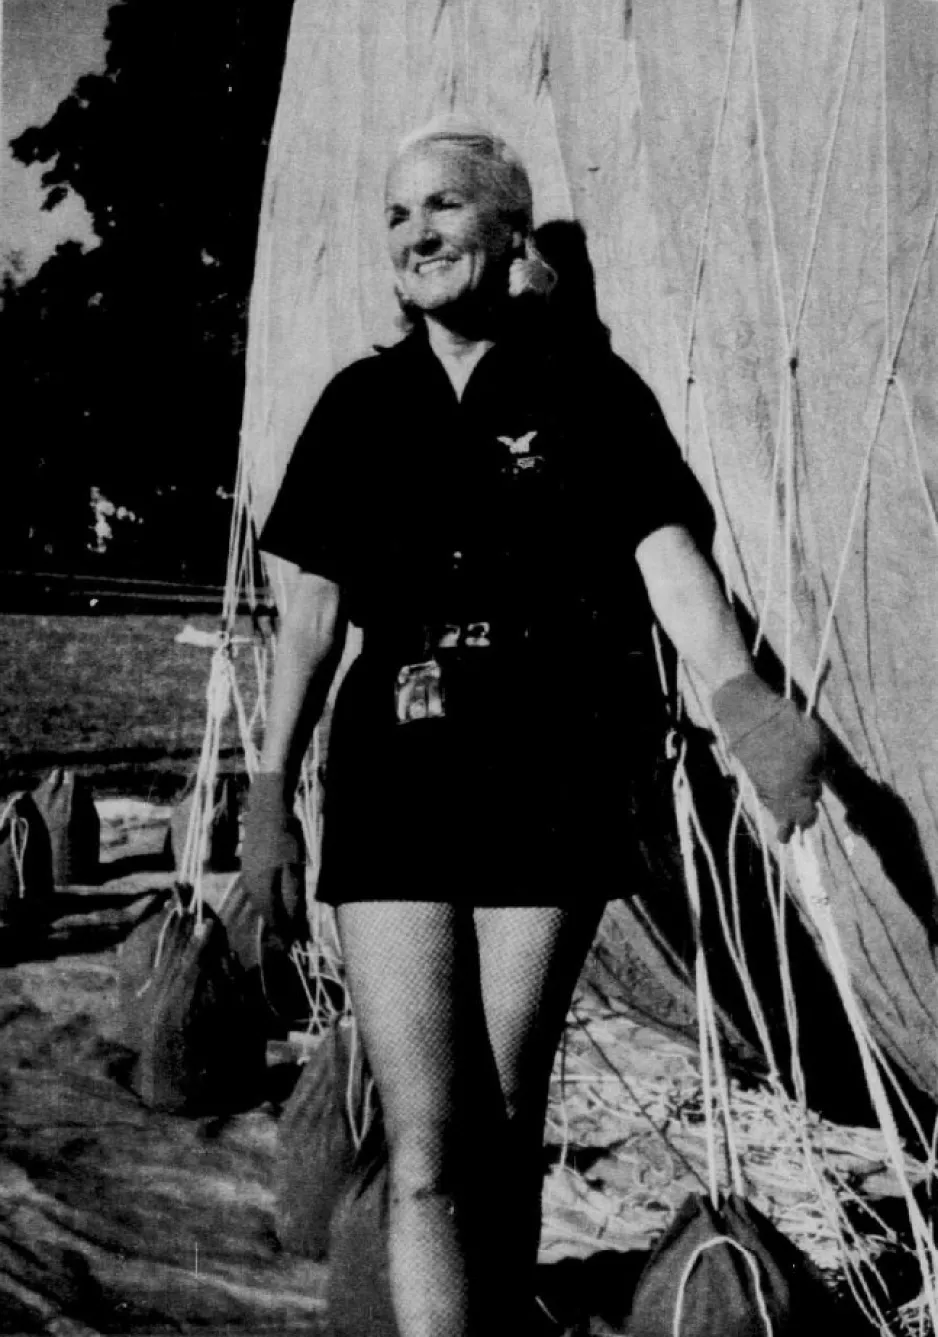 Constance Cann Wolf besides one of the gas balloons she loved so much. Russell Sparr, “Elle ‘joue’ au ballon à l’ère des fusées.” Le Soleil – Perspectives, 14 November 1959, 6.